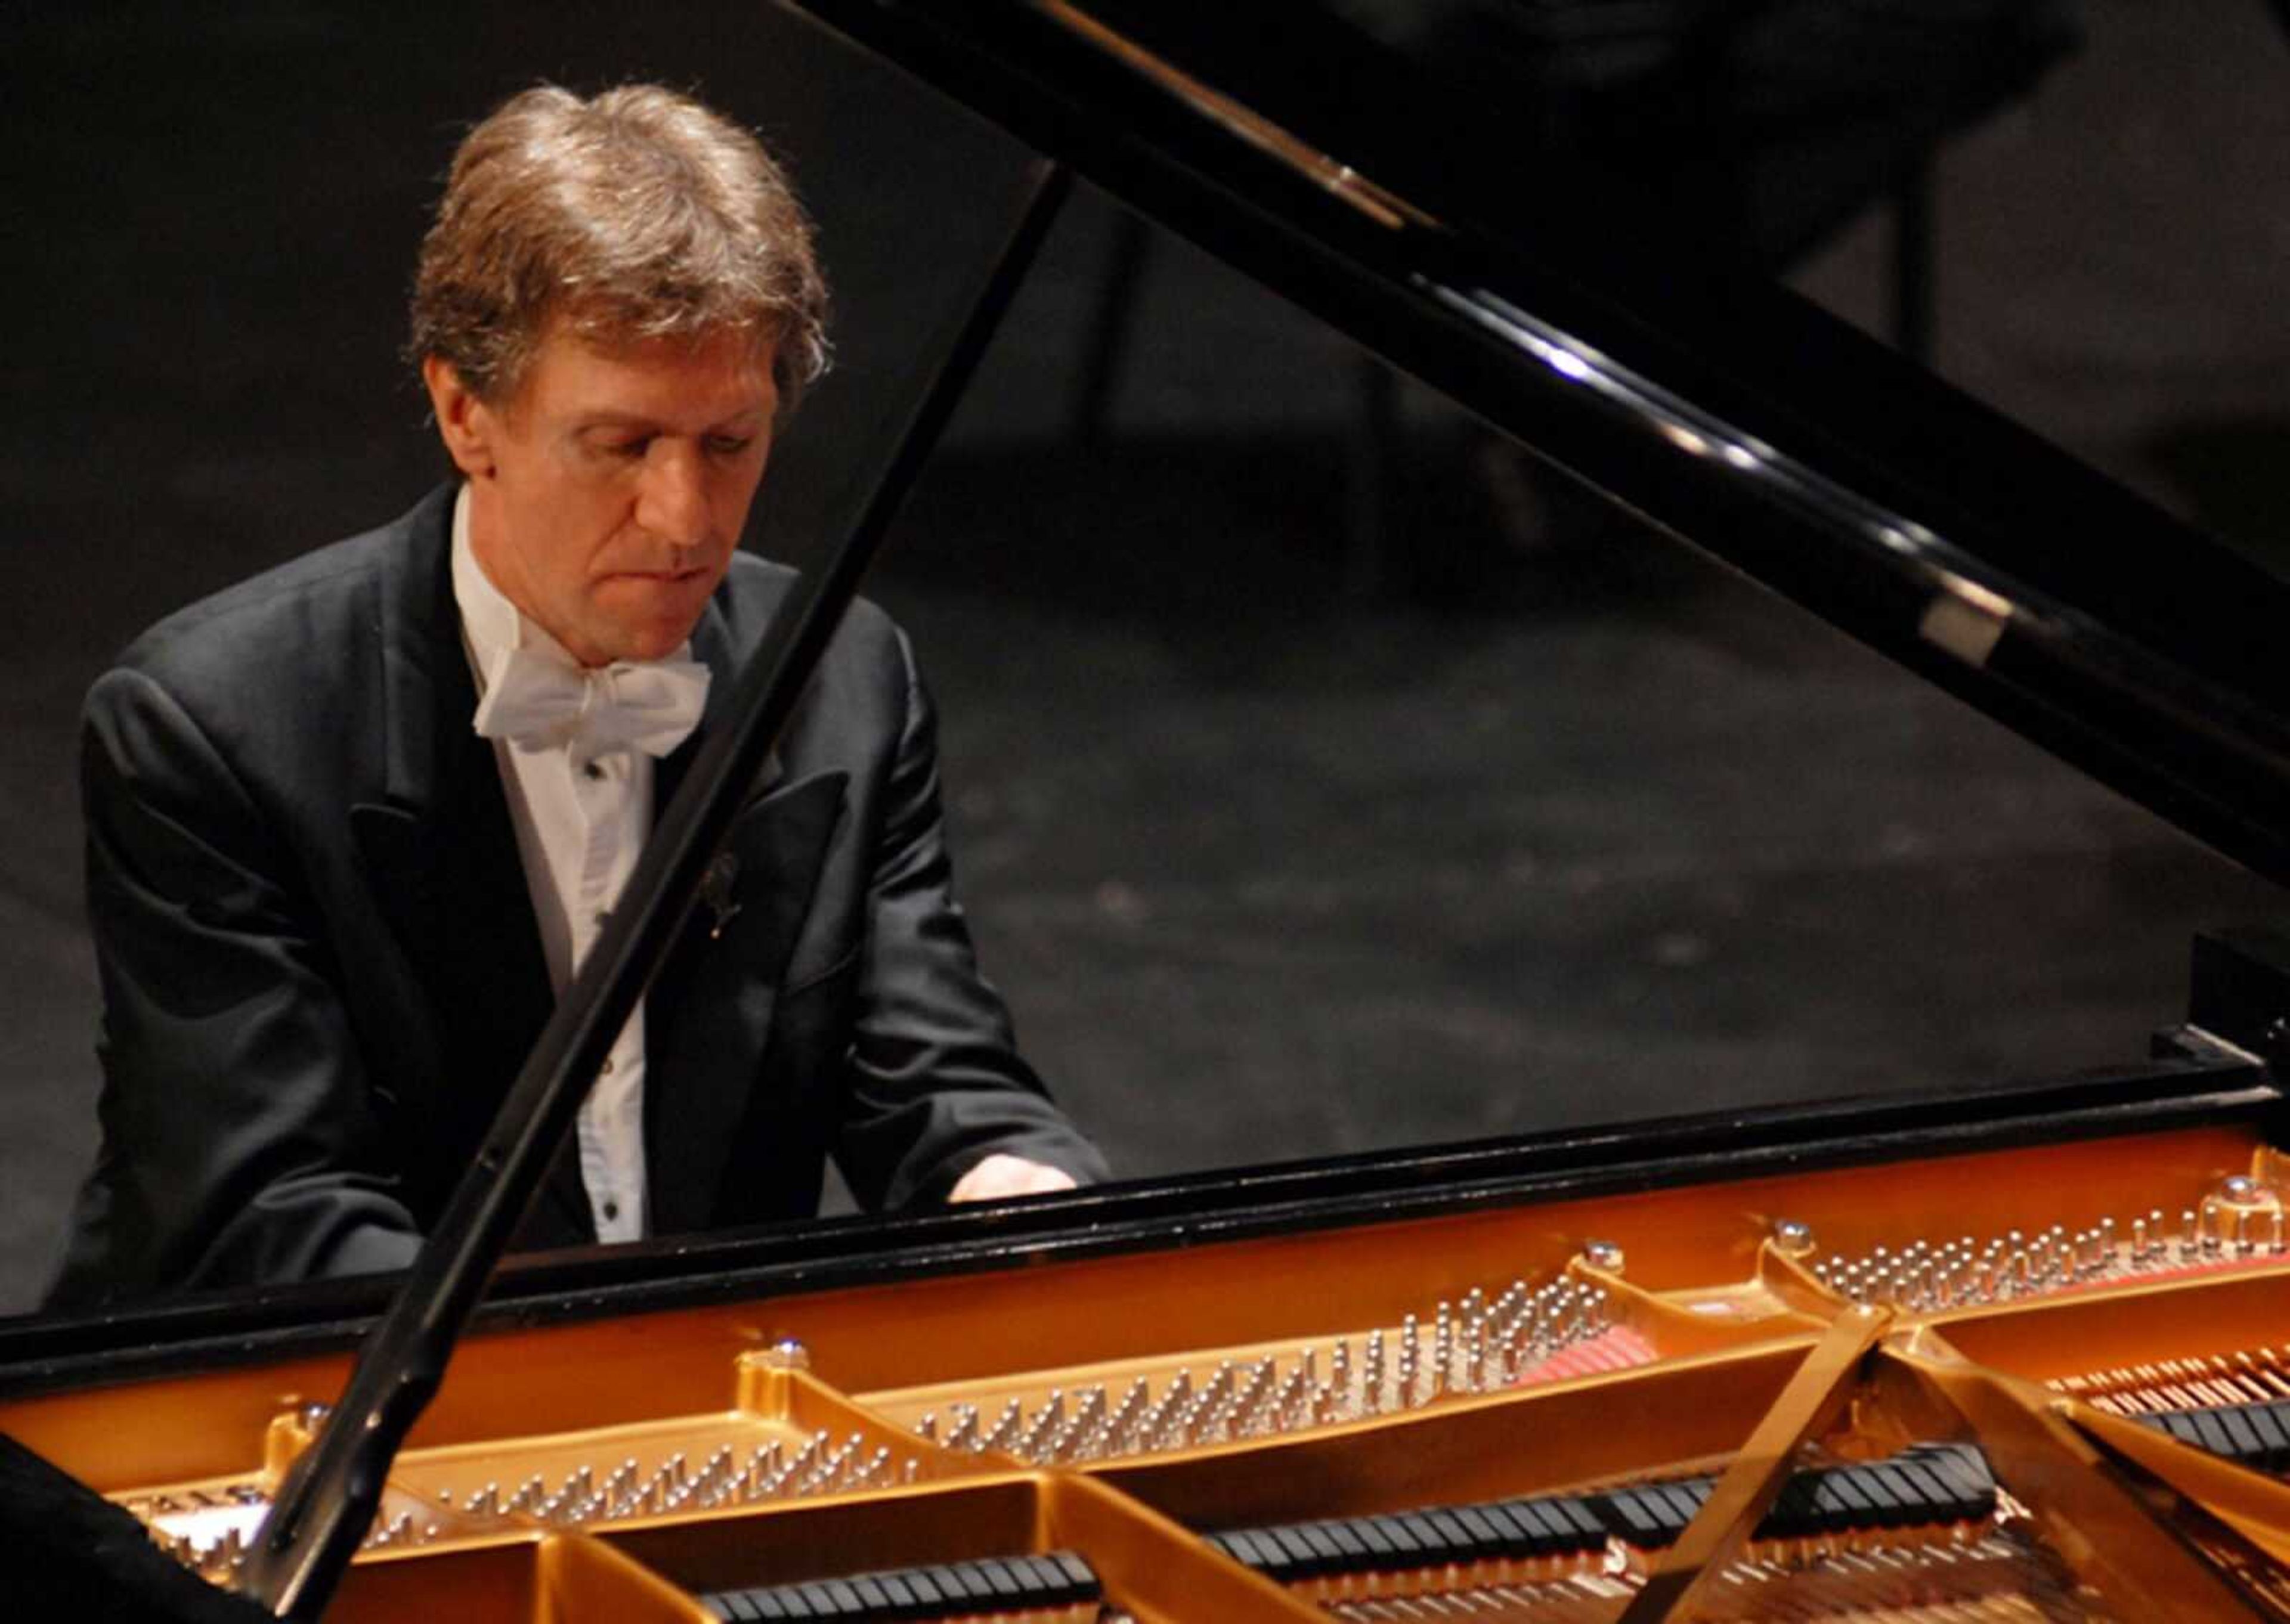 Concert pianist Jack Gibbons will perform at the Gala Season Opener at 7 p.m. on Oct. 9. Submitted photo